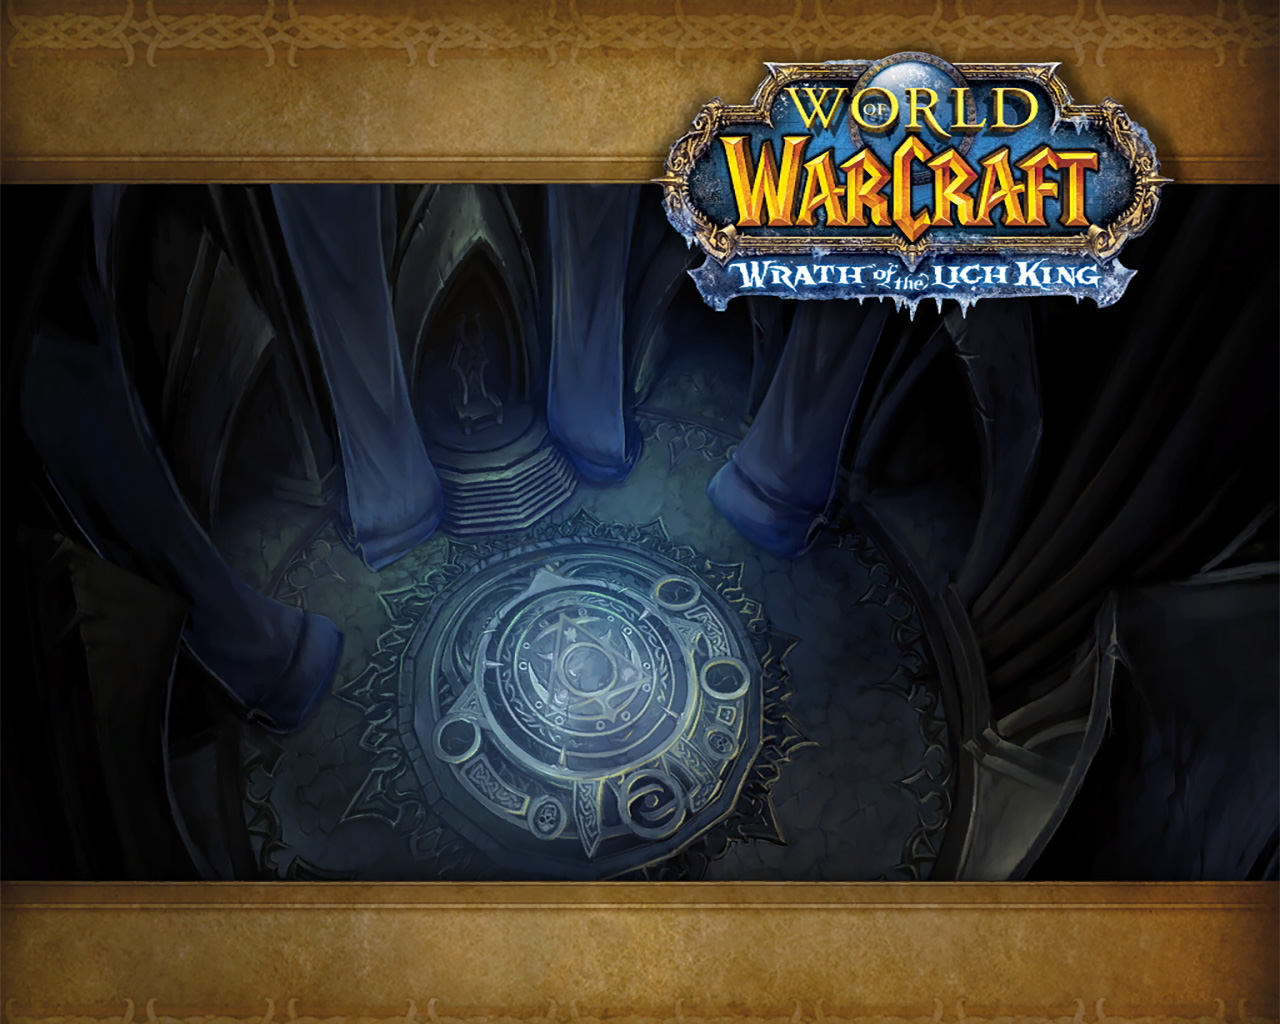 Halls of Reflection - Wowpedia - Your wiki guide to the World of